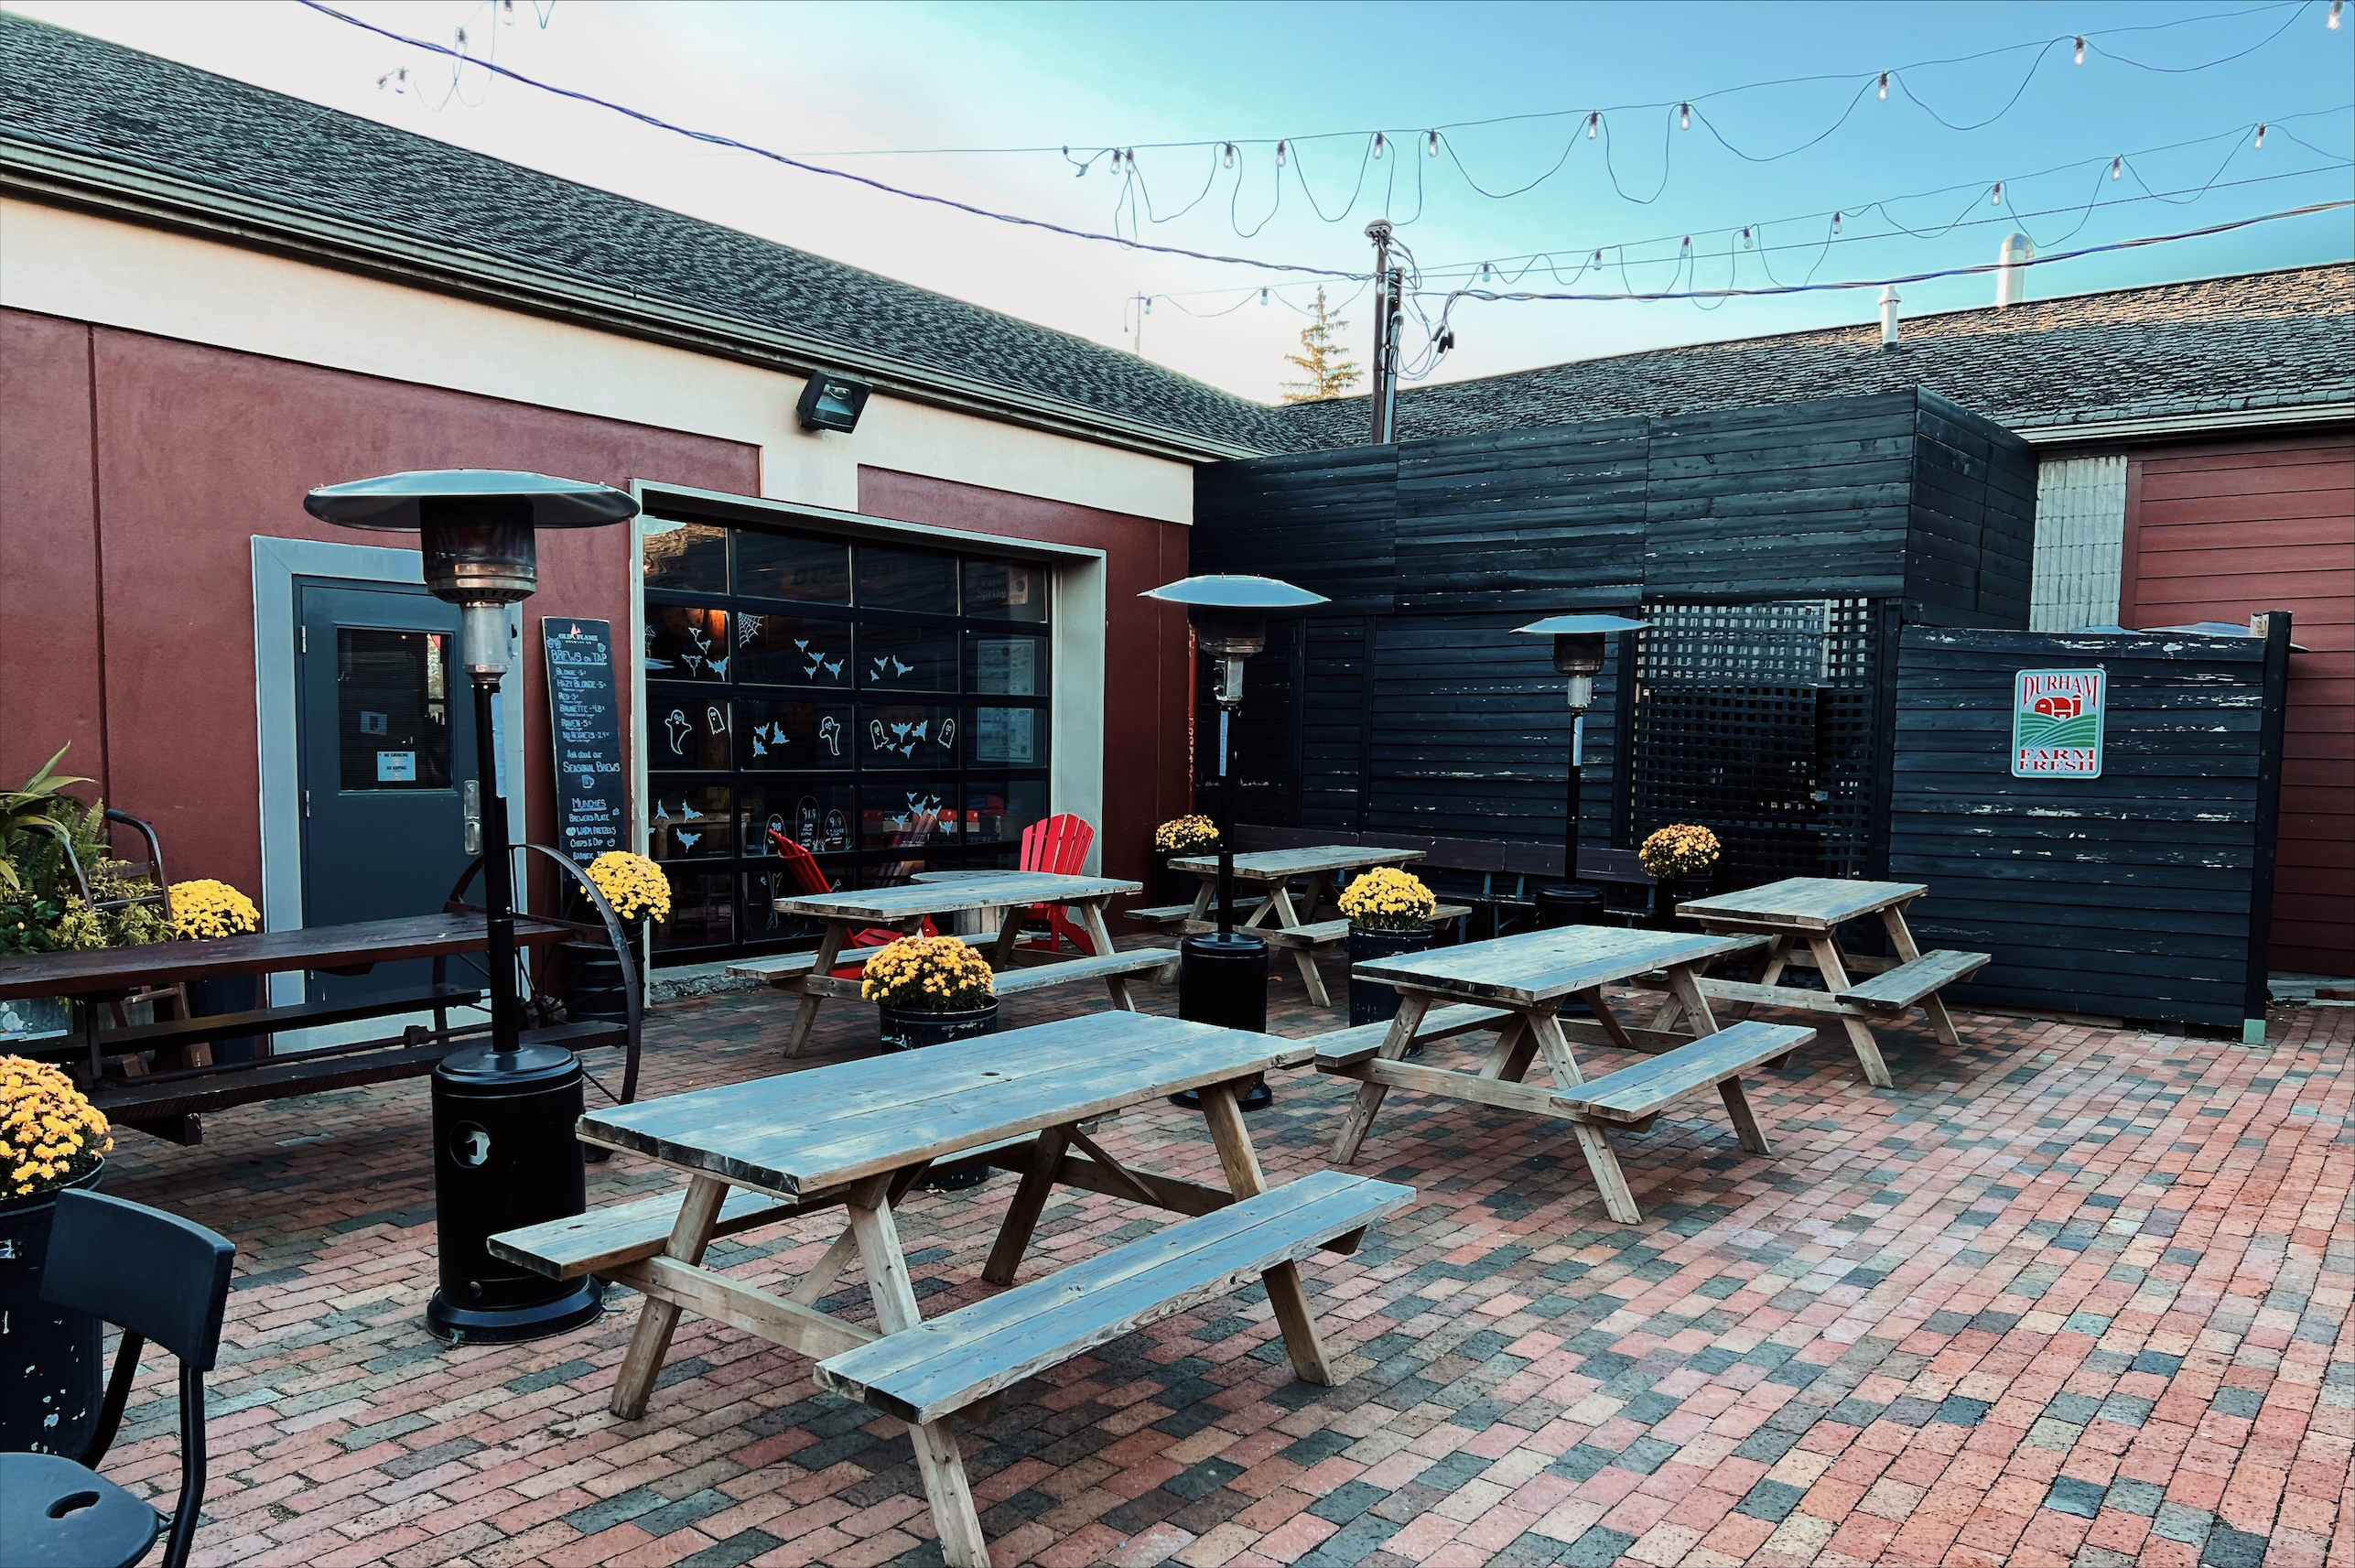 Outdoor patio with picnic tables and heaters at Old Flame Brewery